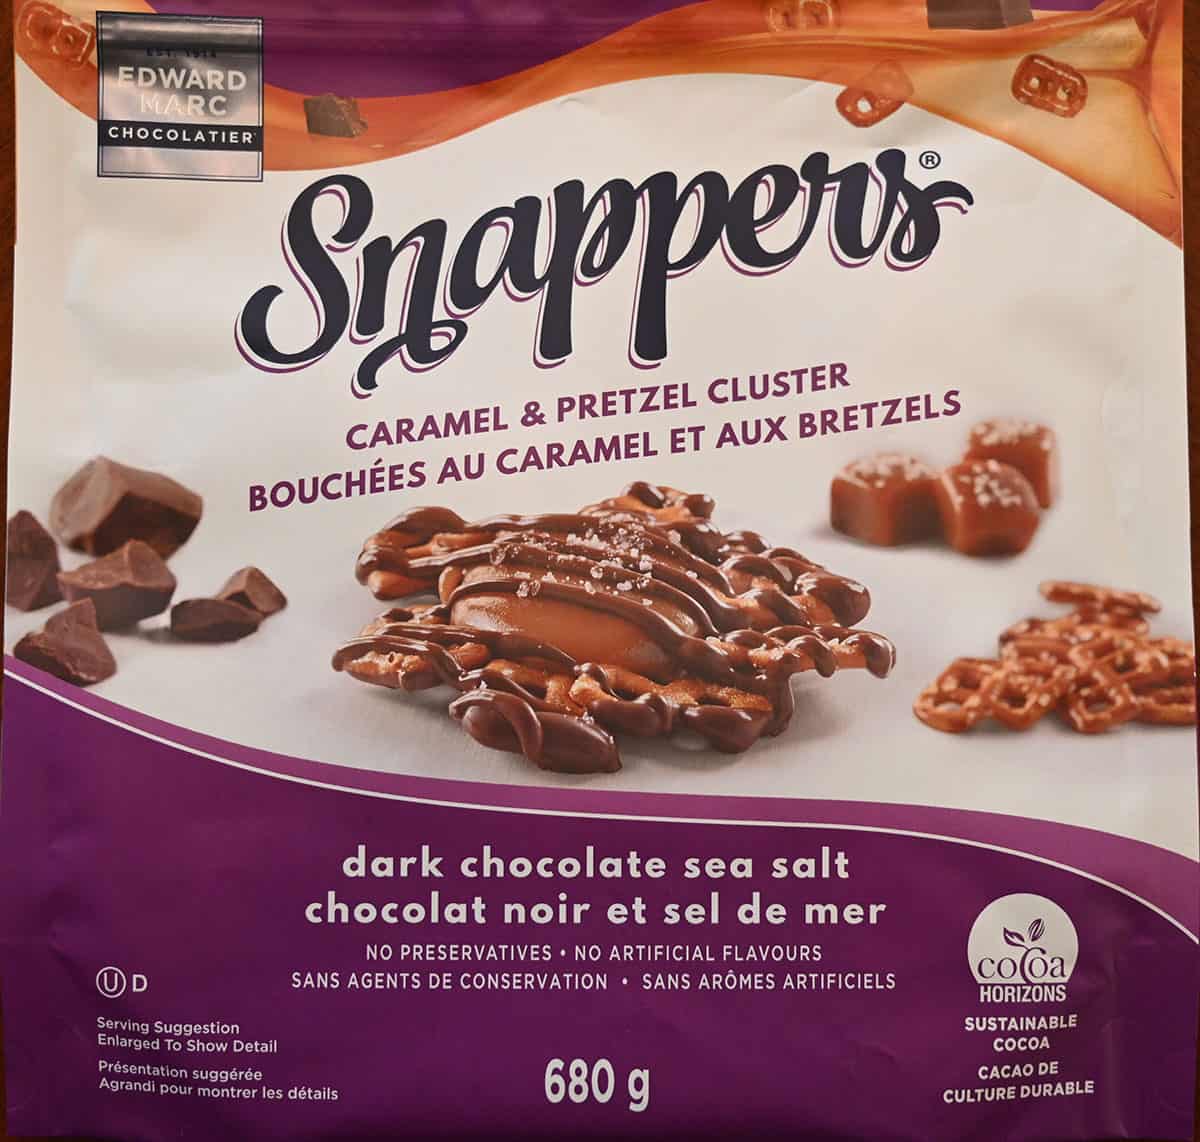 Closeup image of the front of the bag of Costco Snappers.